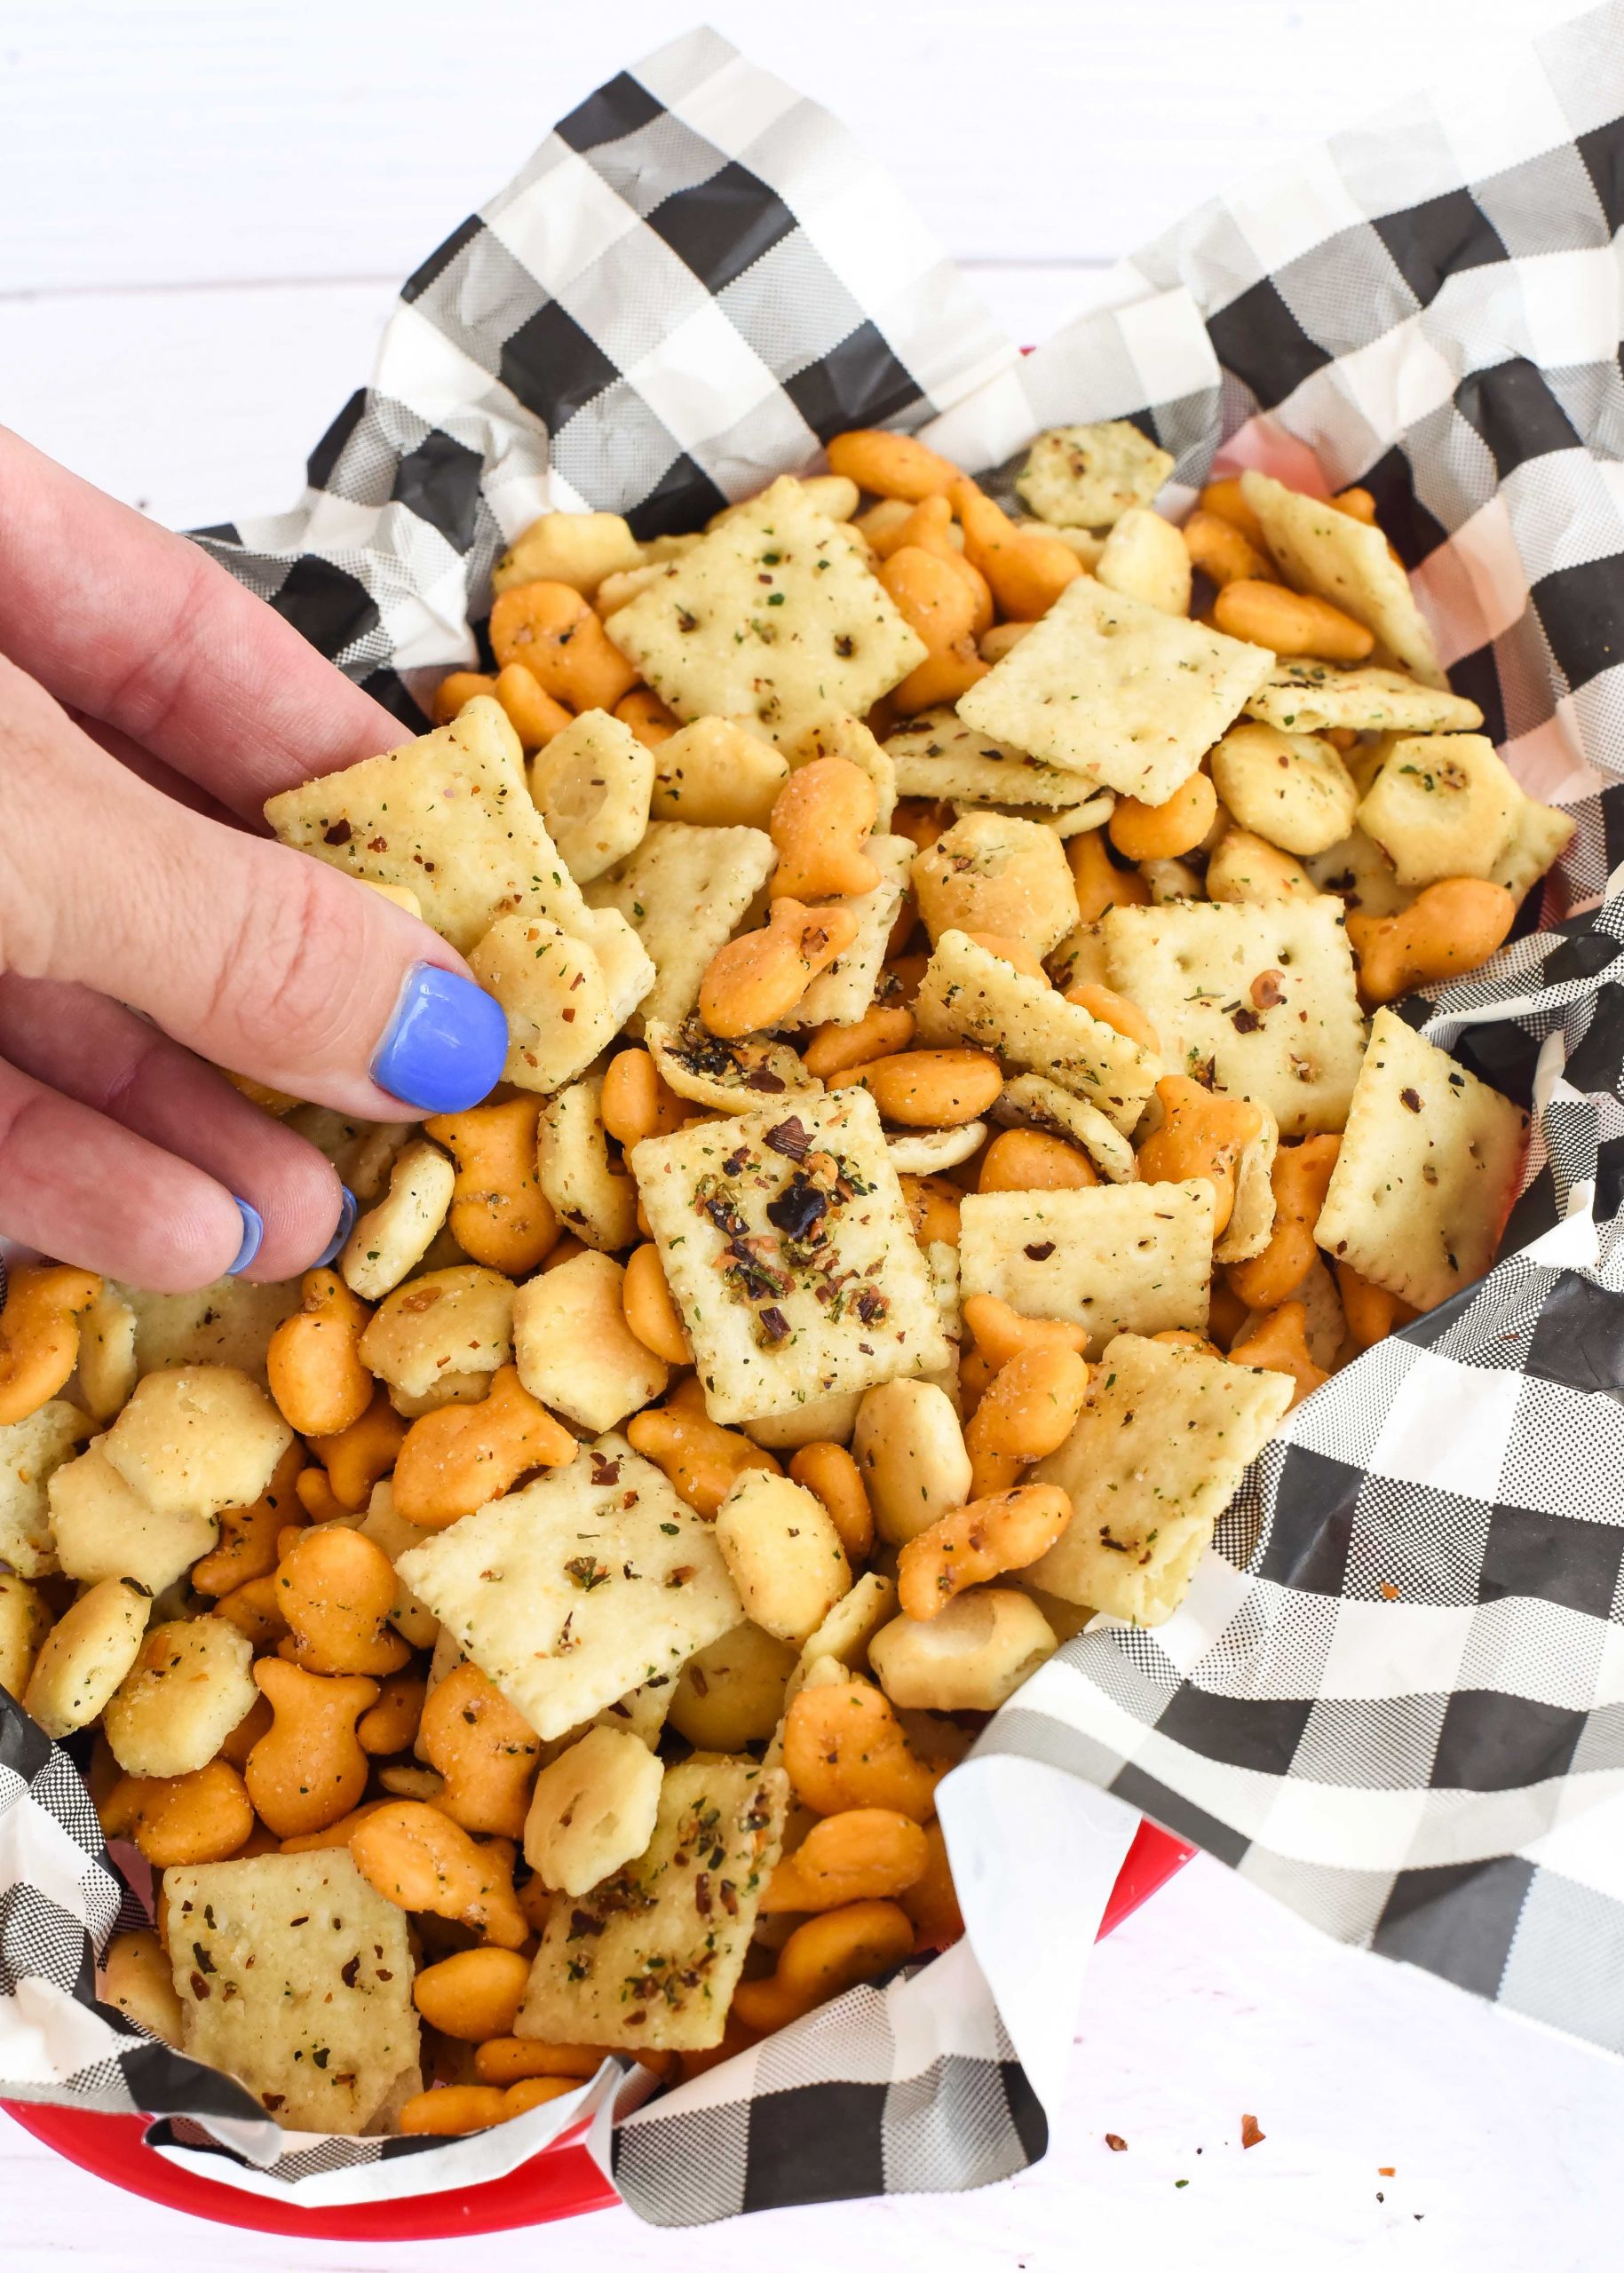 15  Ways How to Make the Best Gluten Free Oyster Crackers
 You Ever Tasted